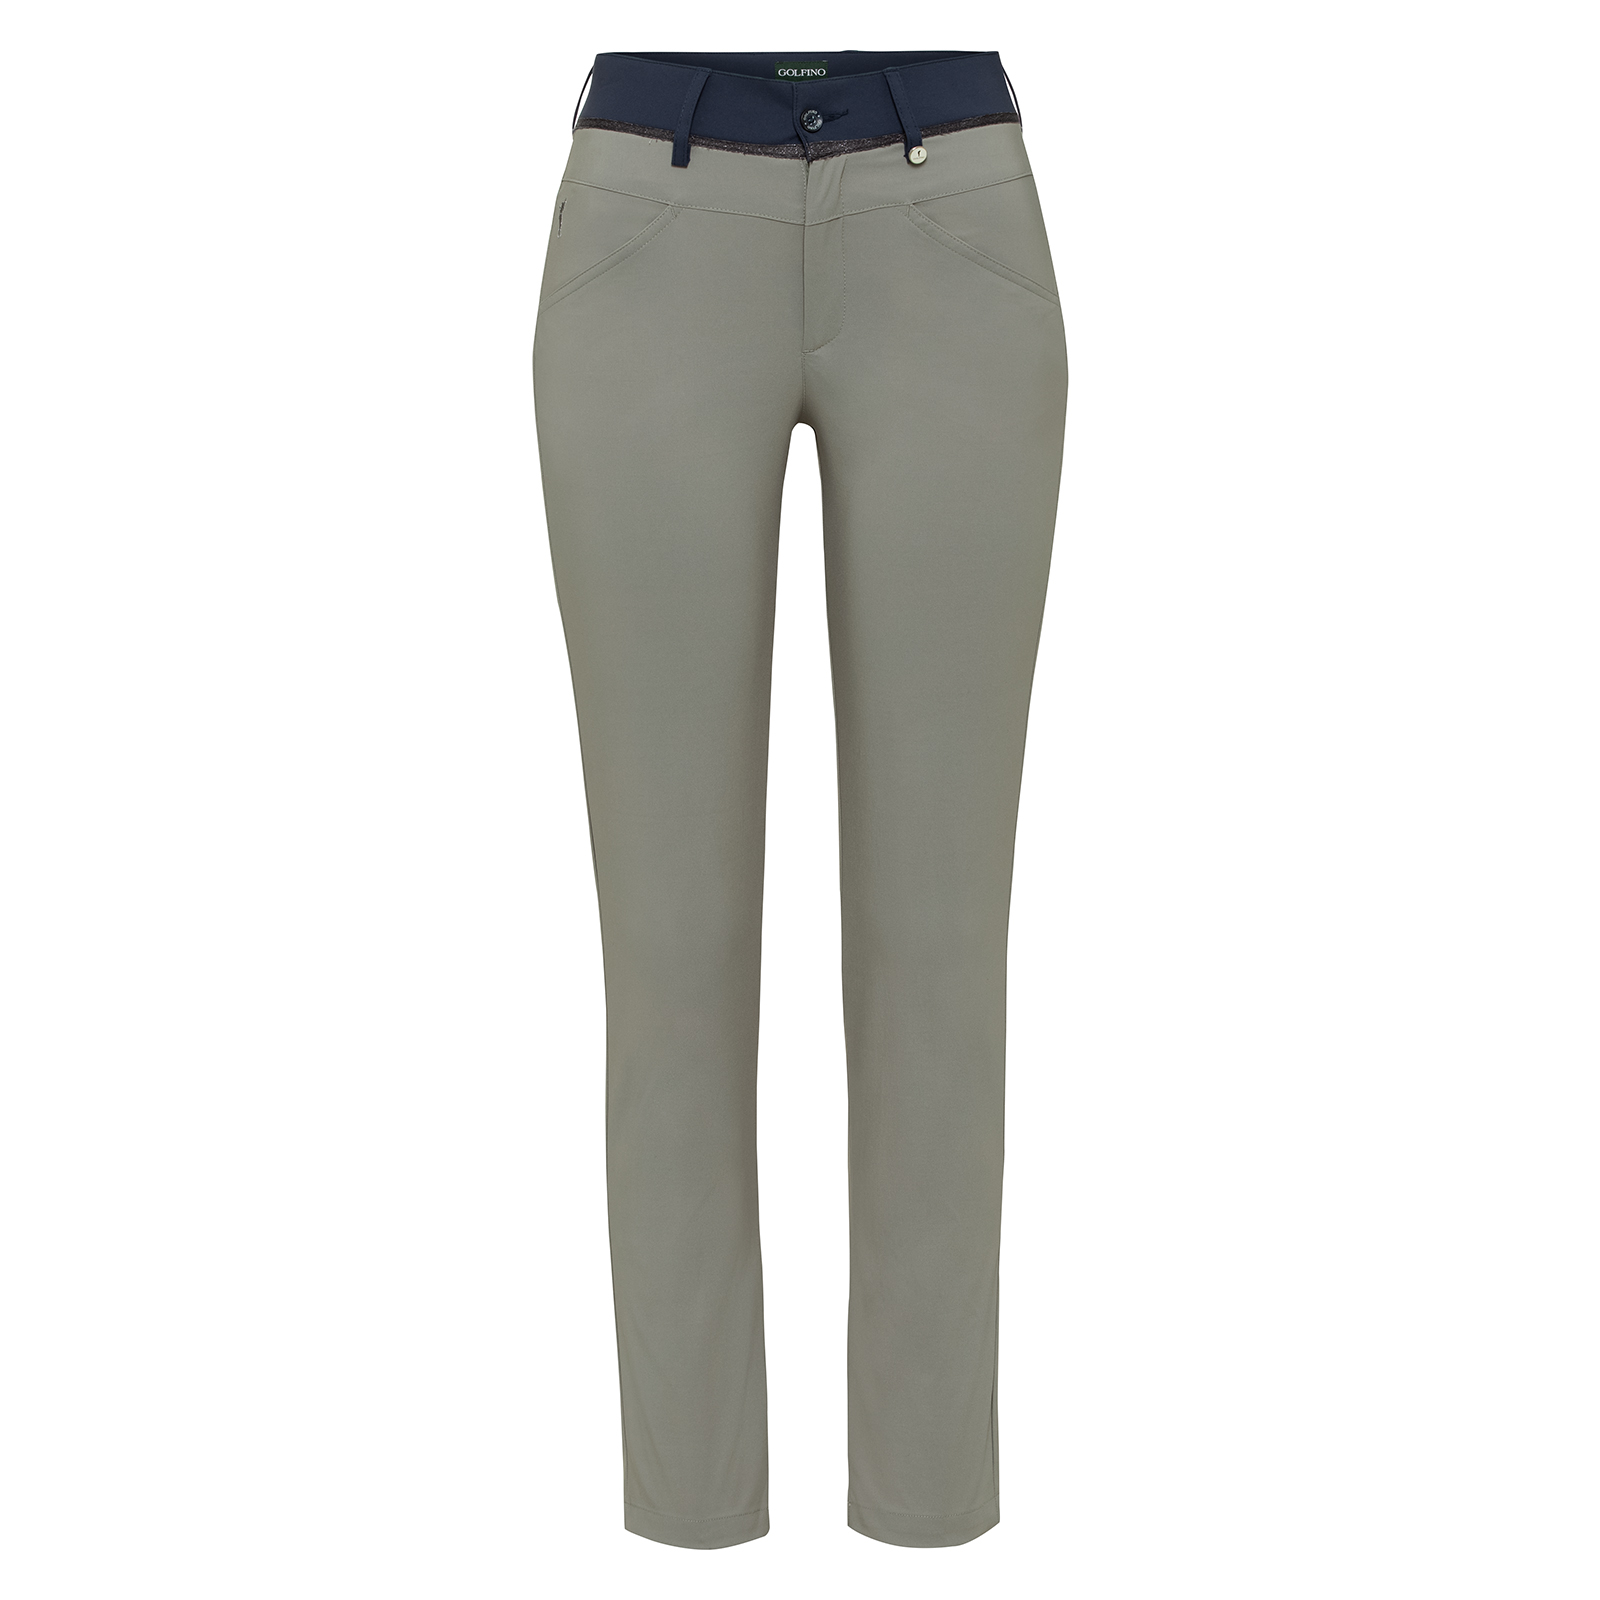 Ladies' stylish 7/8 golf trousers in Techno Stretch with cold weather protection